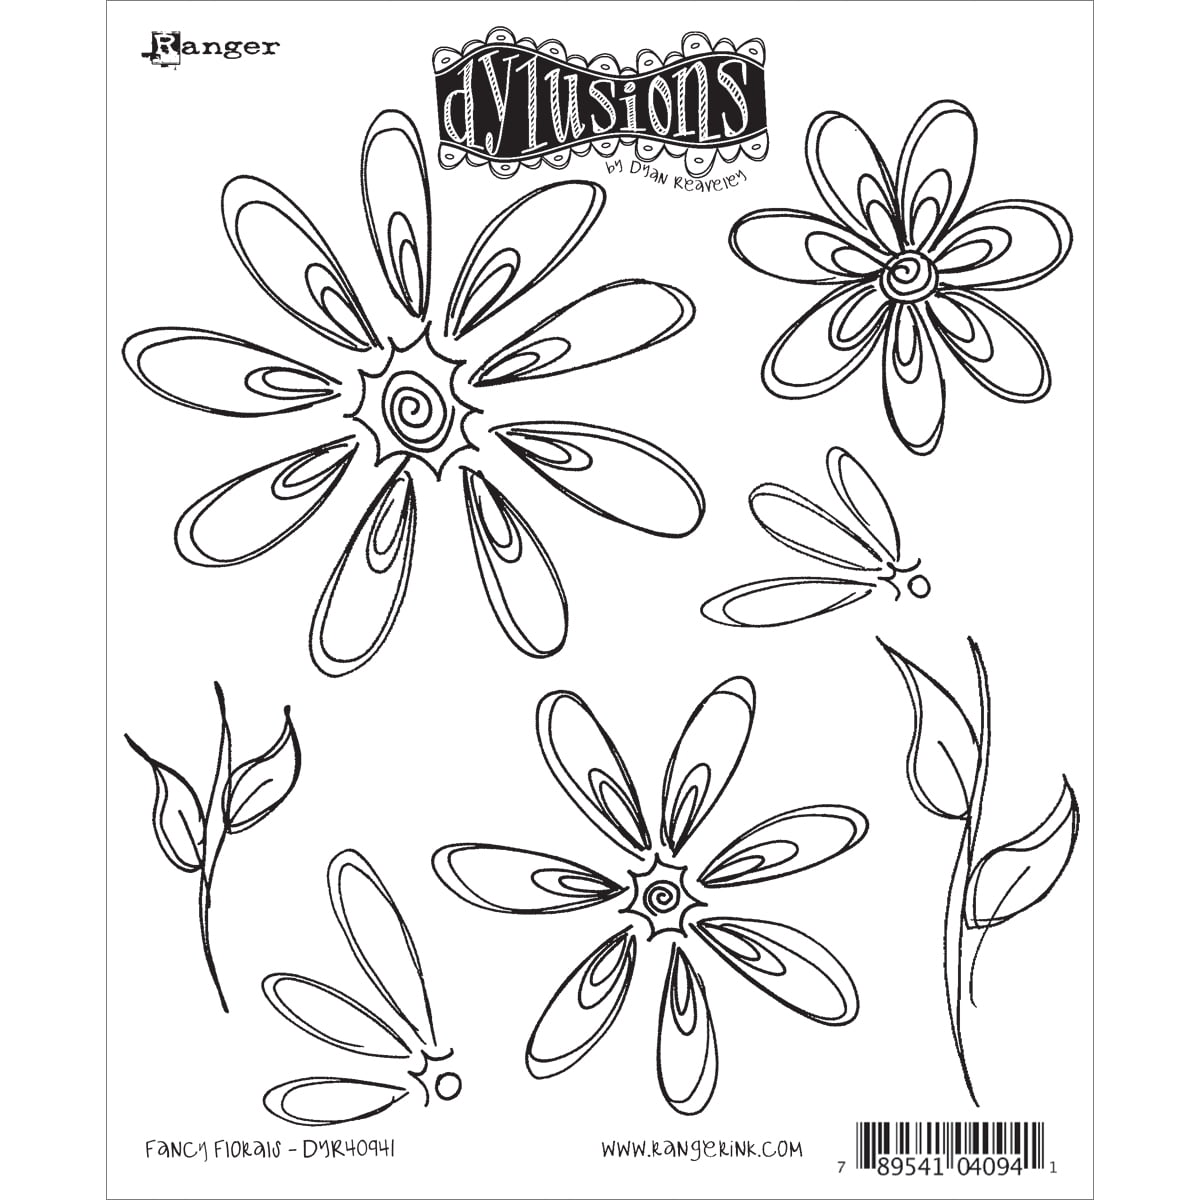 8.5 by 7-Inch Ranger DYR-34575 Dyan Reaveleys Dylusions Cling Stamp Collections Inbetweenies